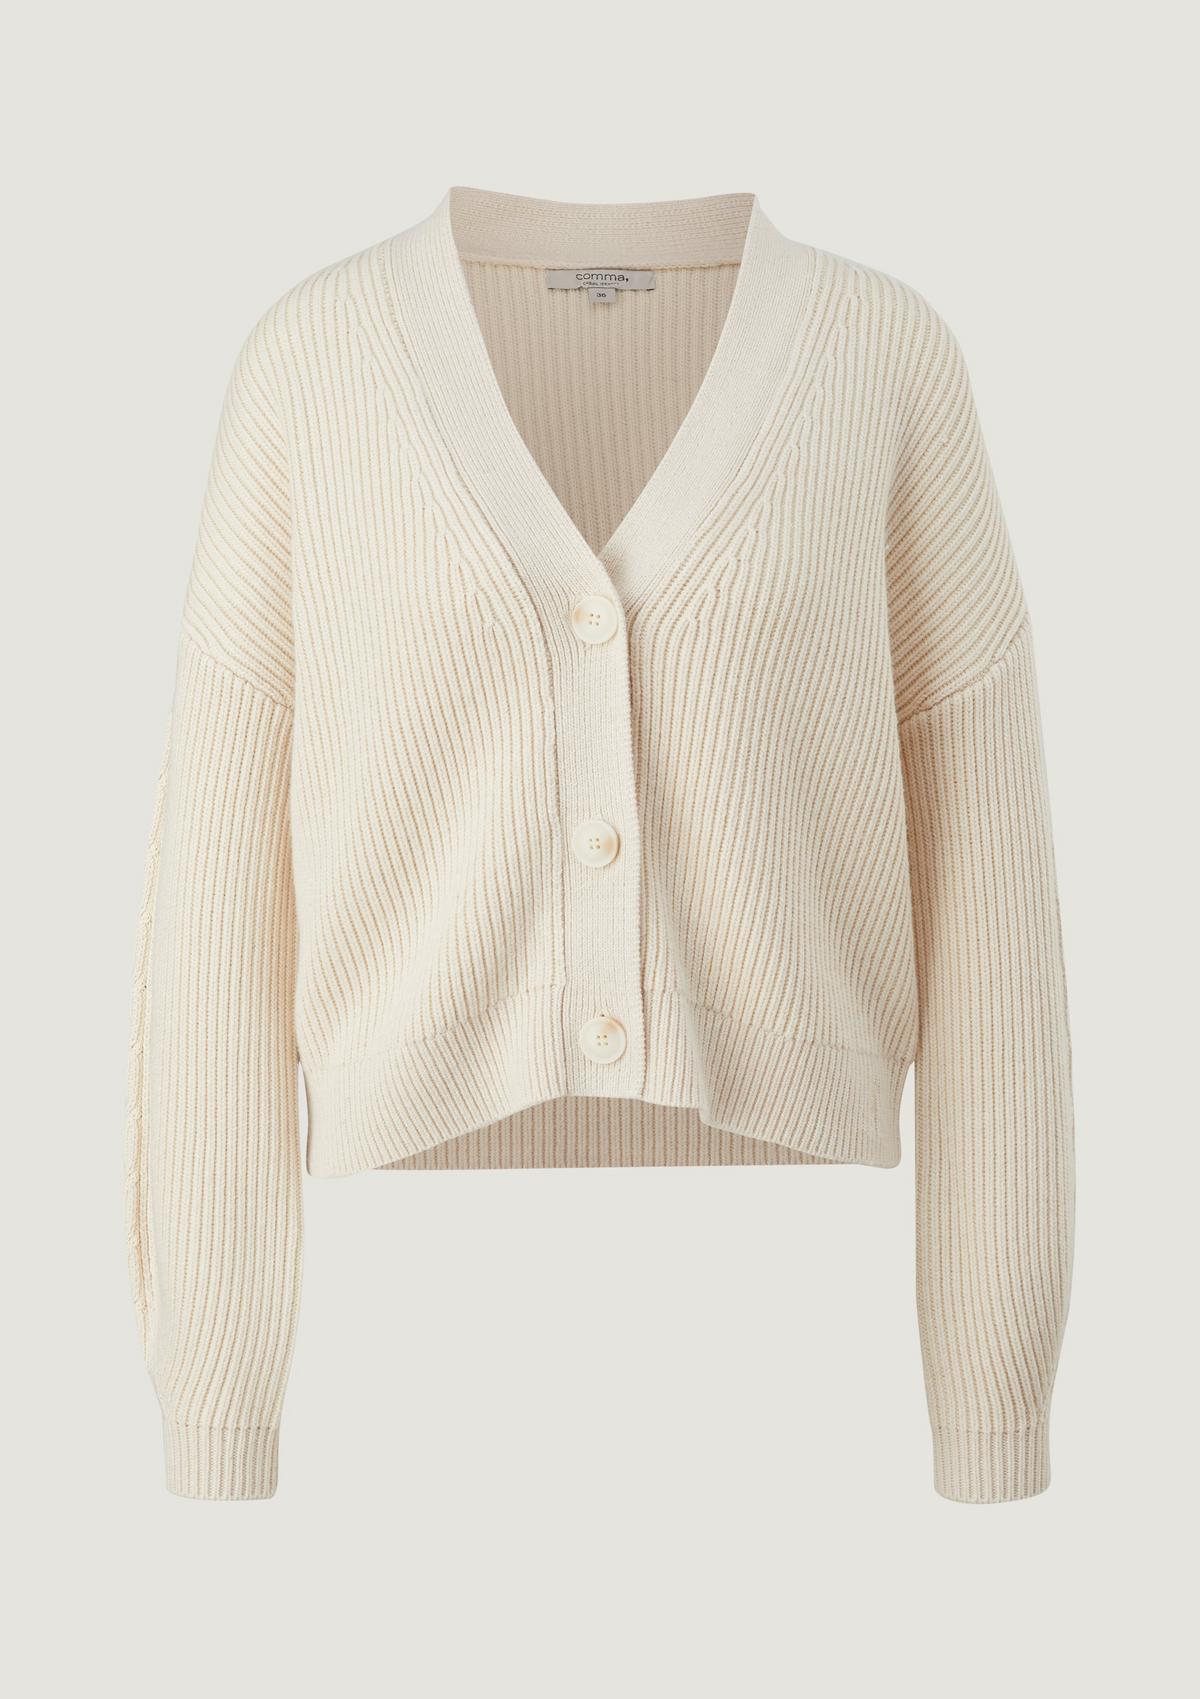 Cardigans for everyday wear | Comma